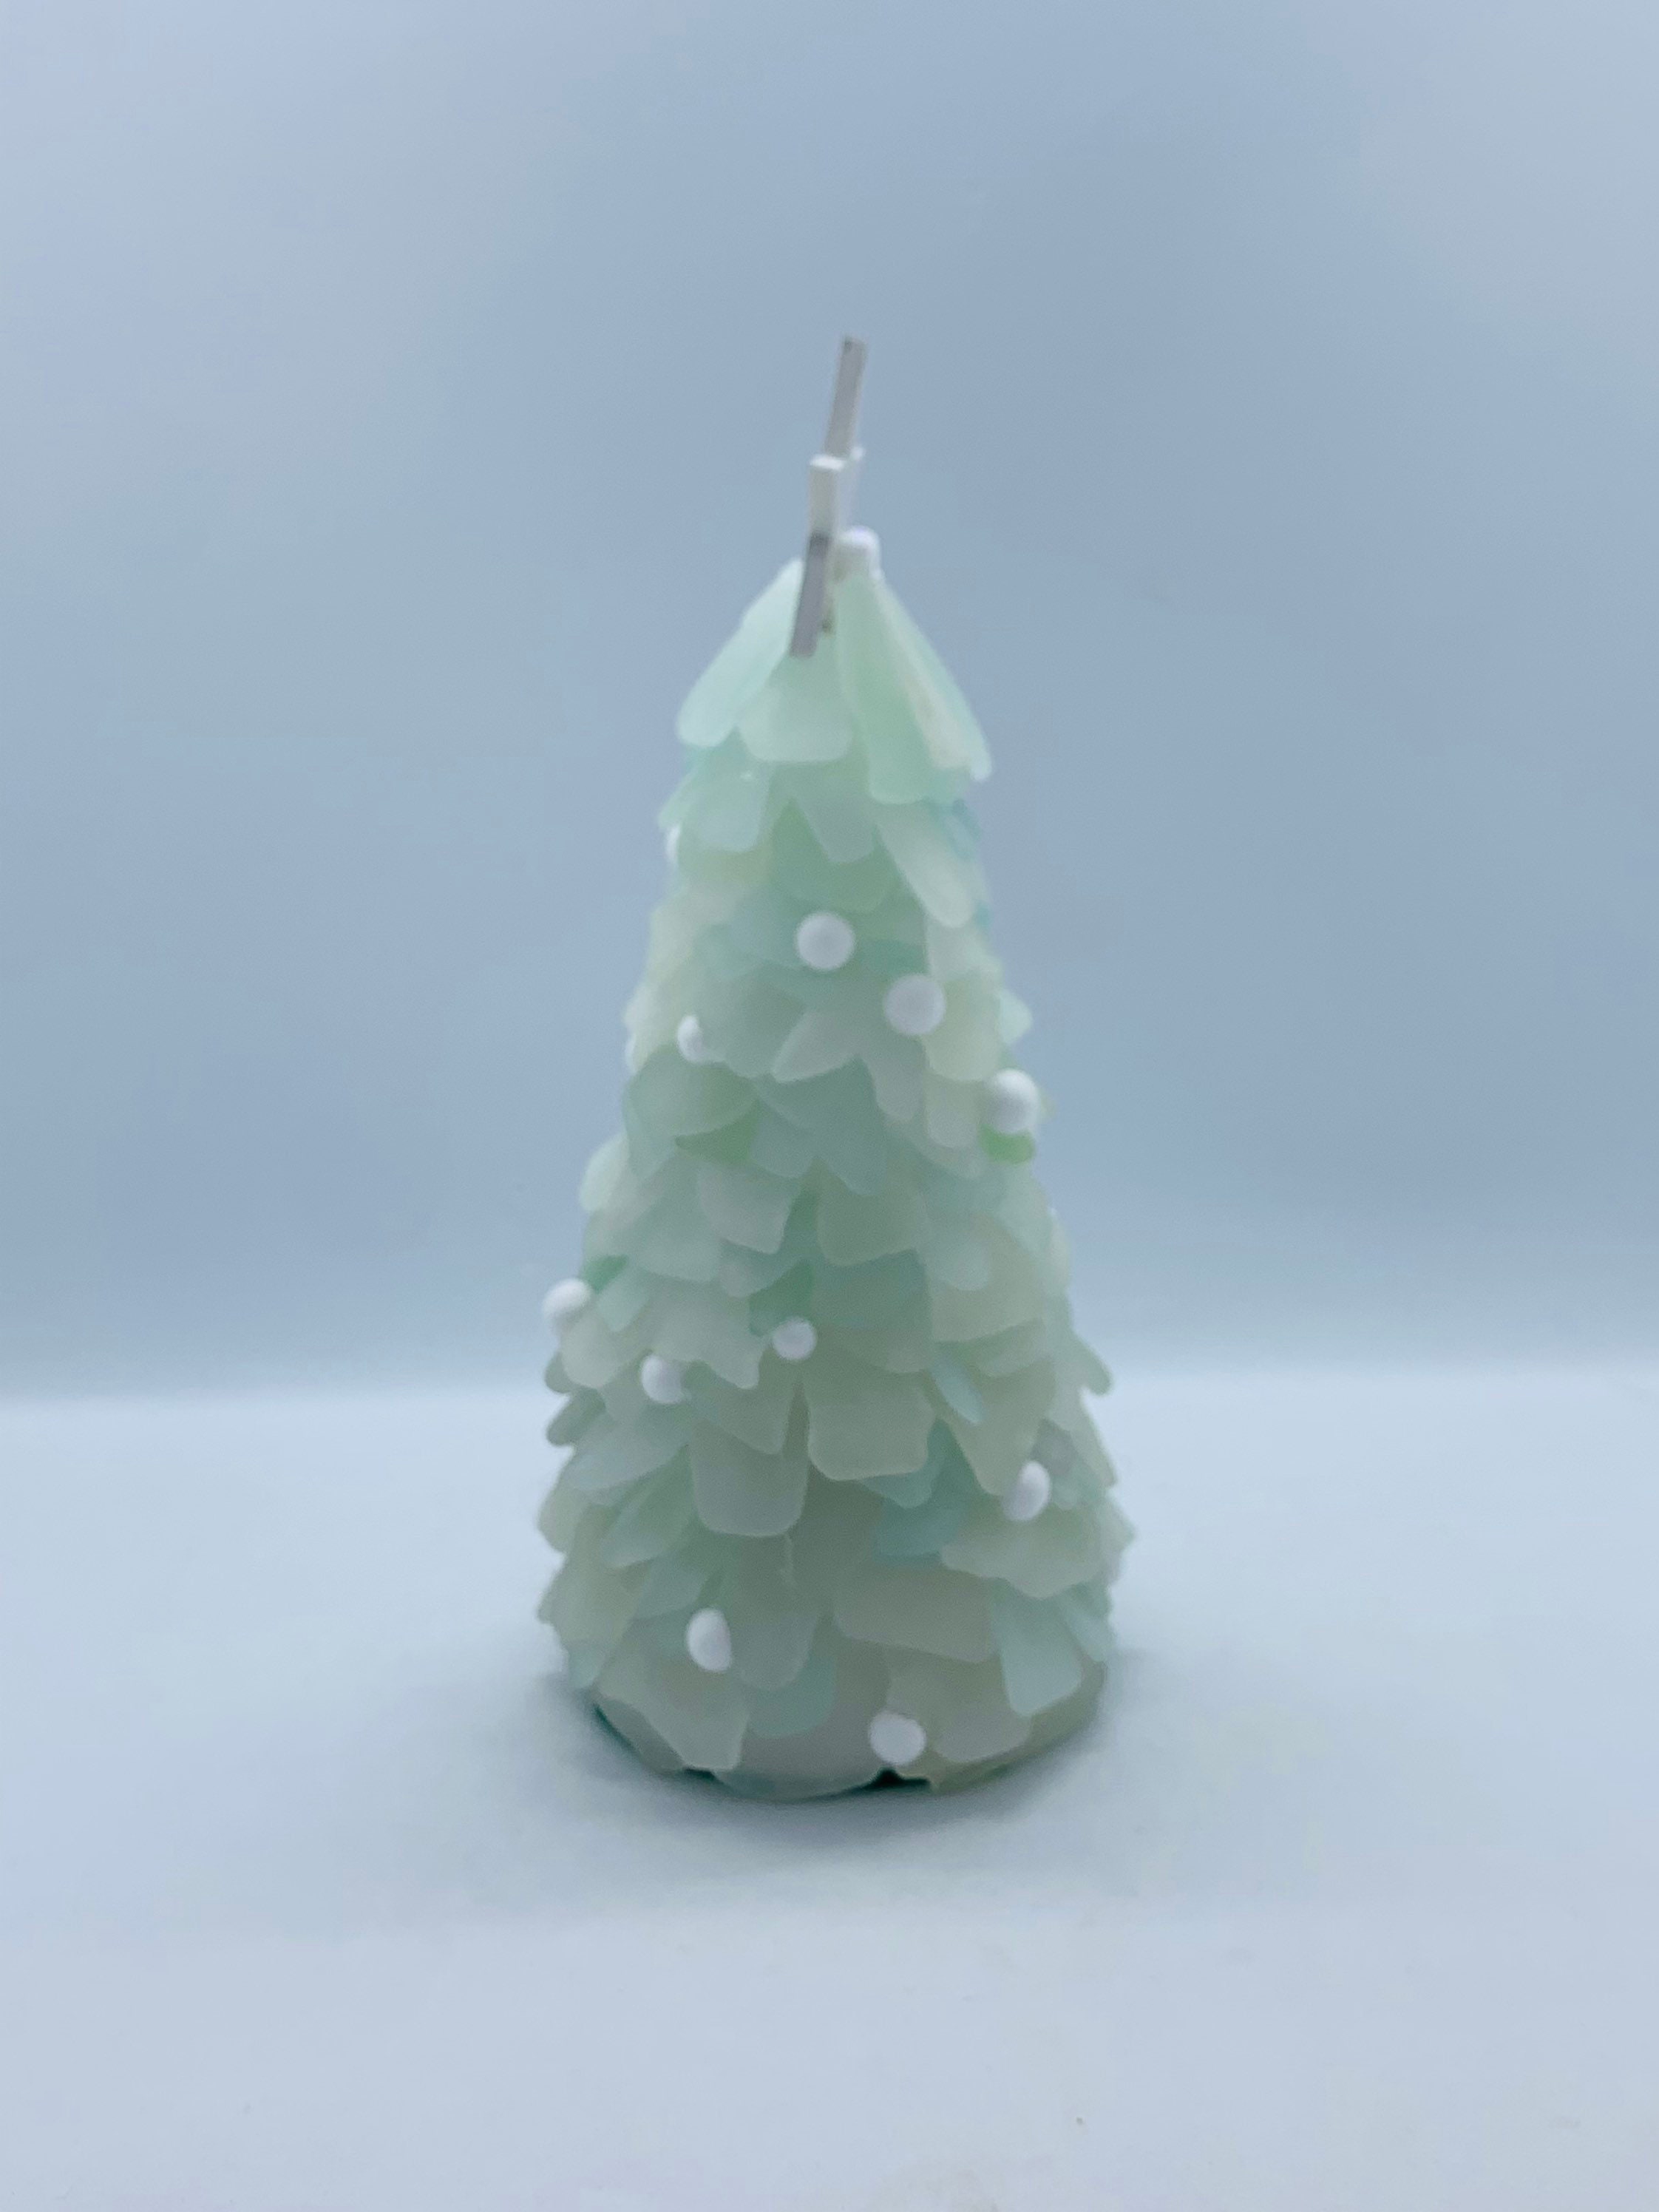 Cornish Sea Glass Christmas Trees 18cm in height Non Light Up decorations